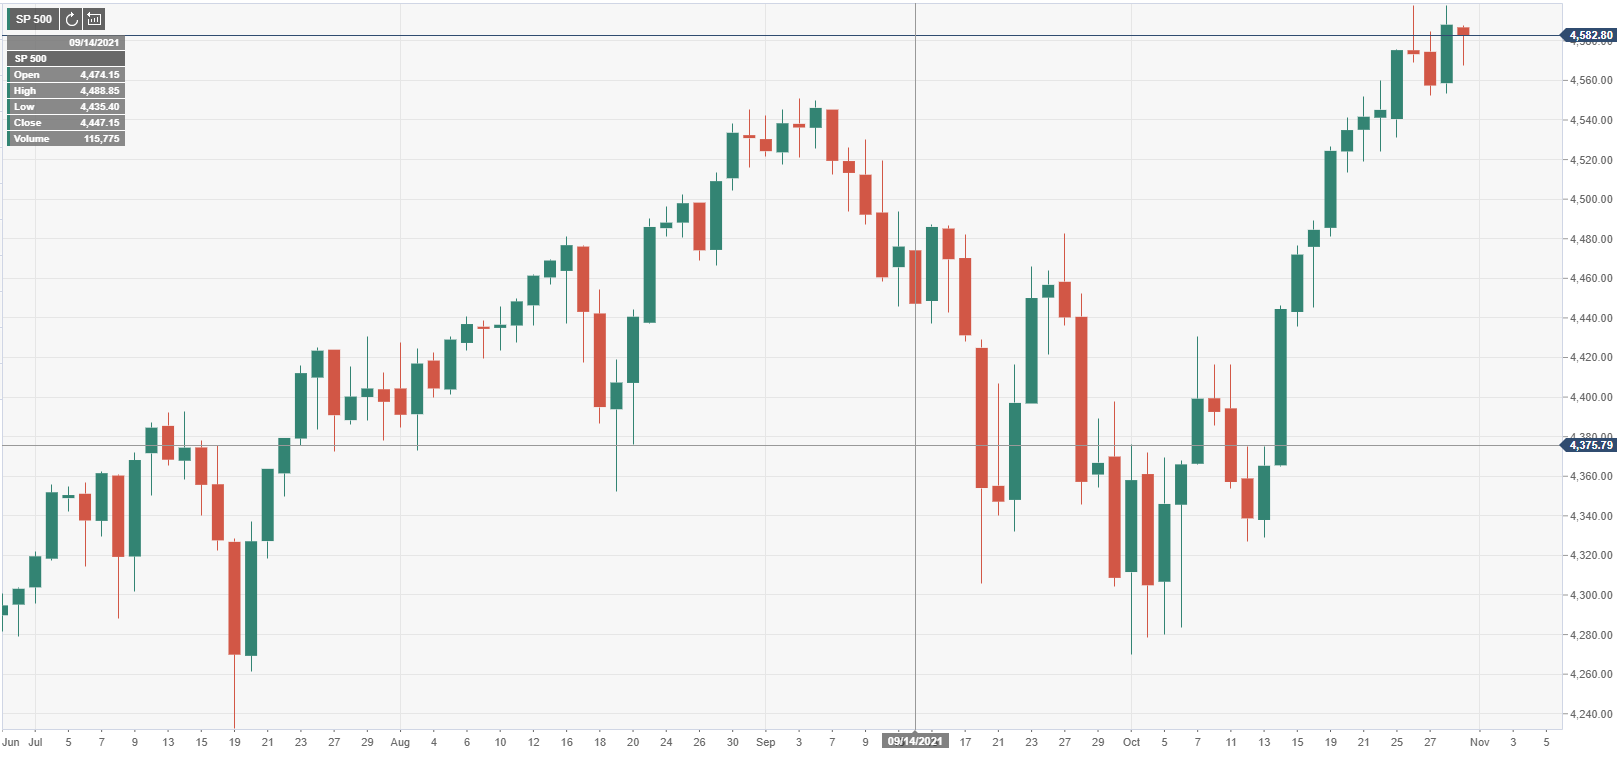 The S&P 500 Index opens lower on the last trading day of October